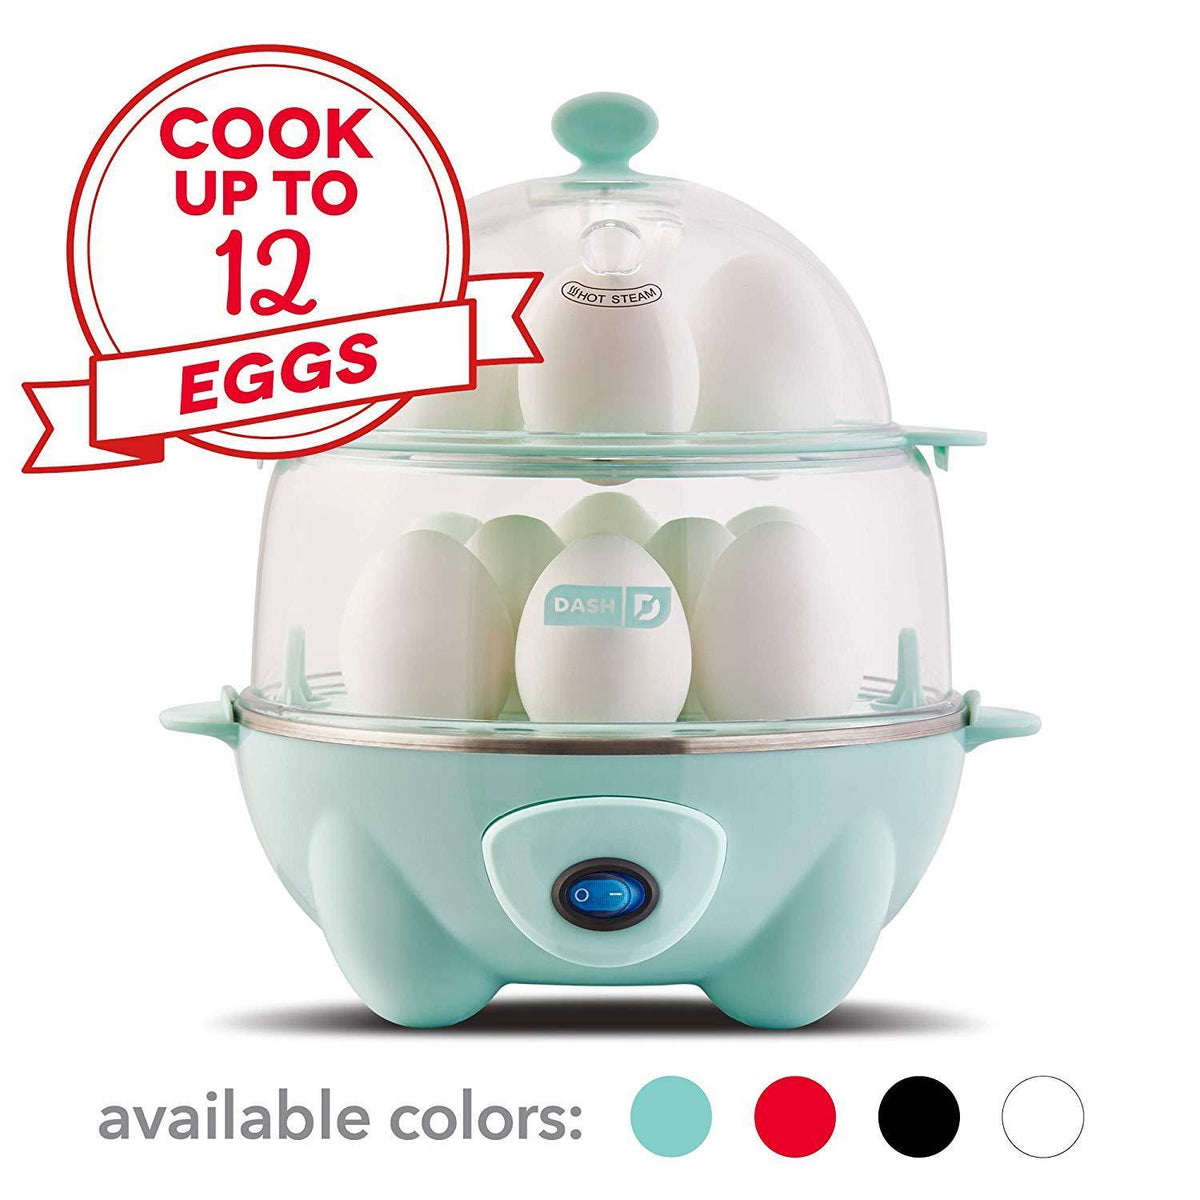 Dash Deluxe Rapid Egg Cooker for Hard Boiled, Poached, Scrambled